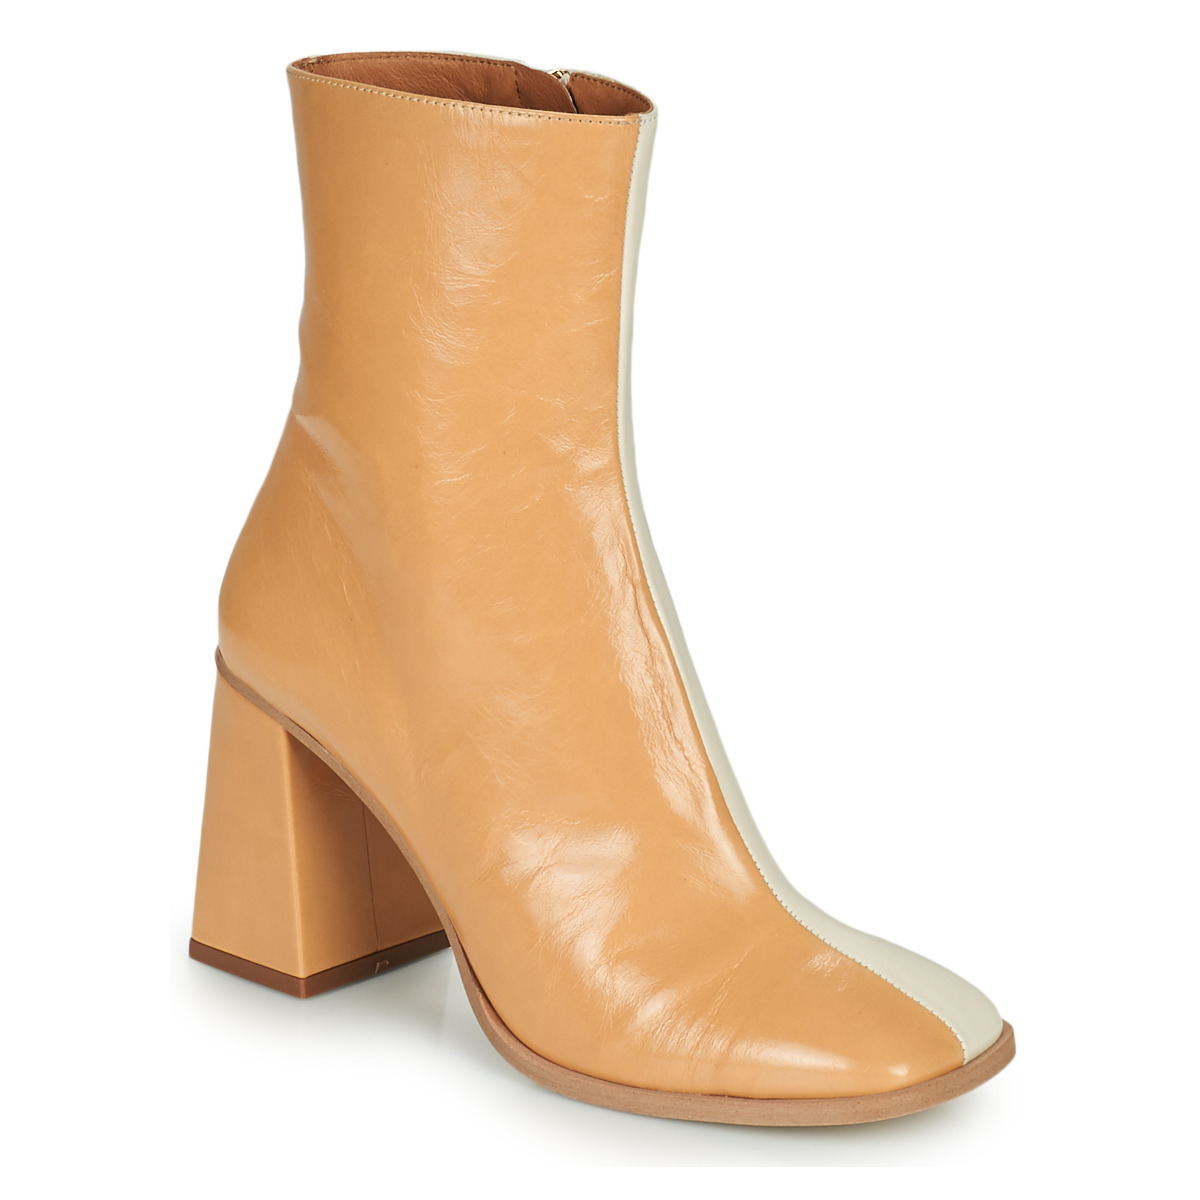 Minelli Ankle Boots in Beige for Women by Spartoo GOOFASH